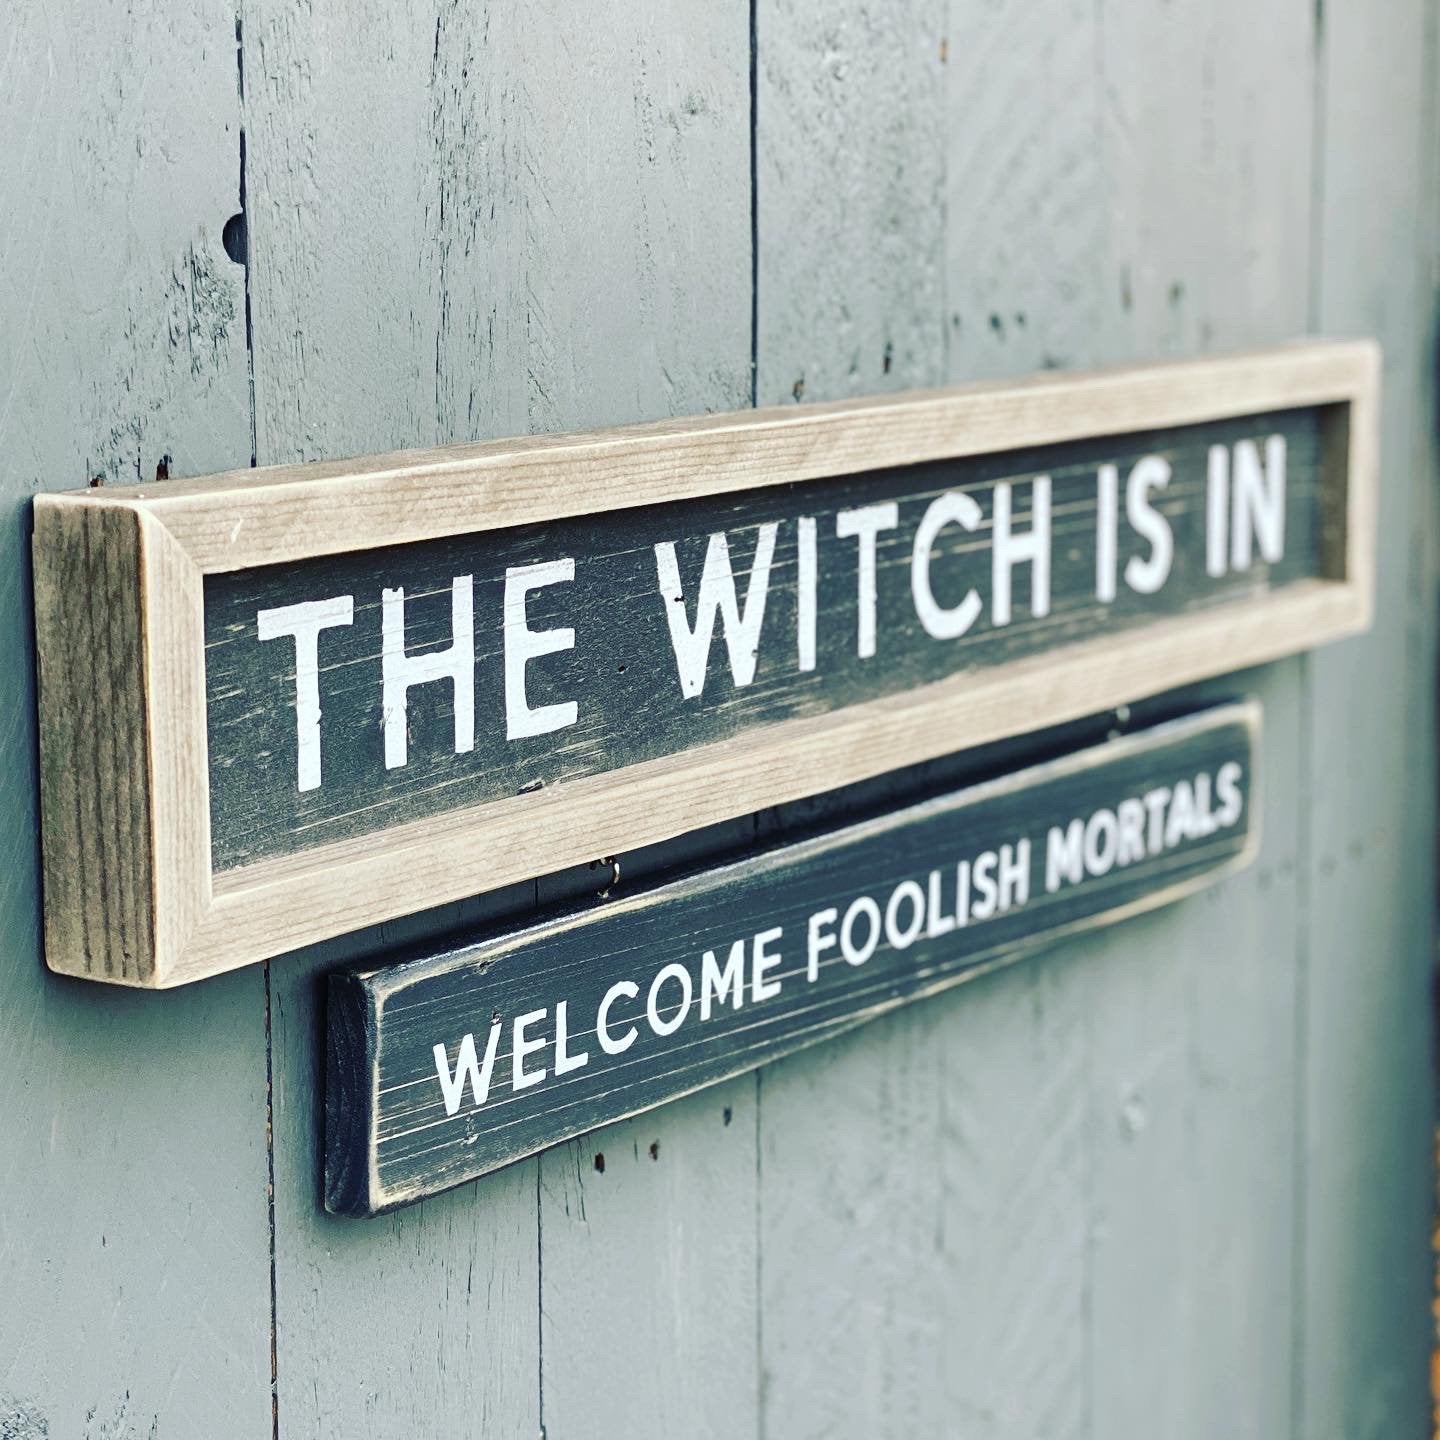 The Witch Is In | Framed Rustic Long Wood Sign - The Imperfect Wood Company - Rustic Framed Long Wood Sign